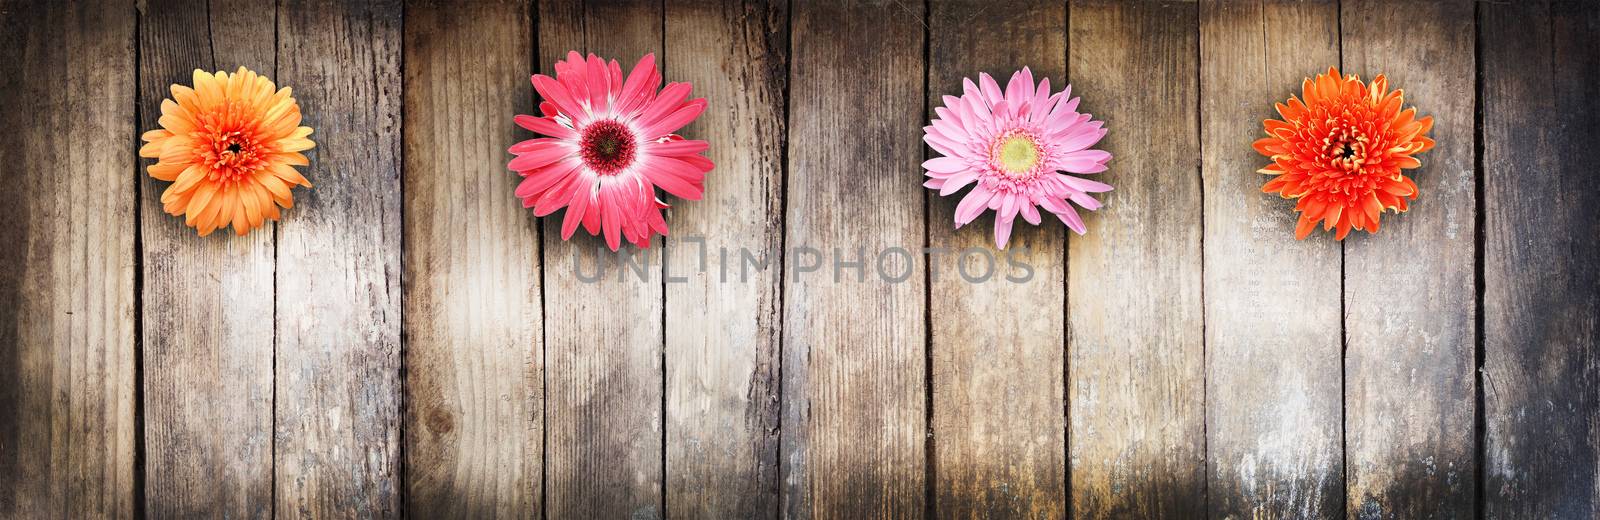 Wooden texture and flowers. by symkin